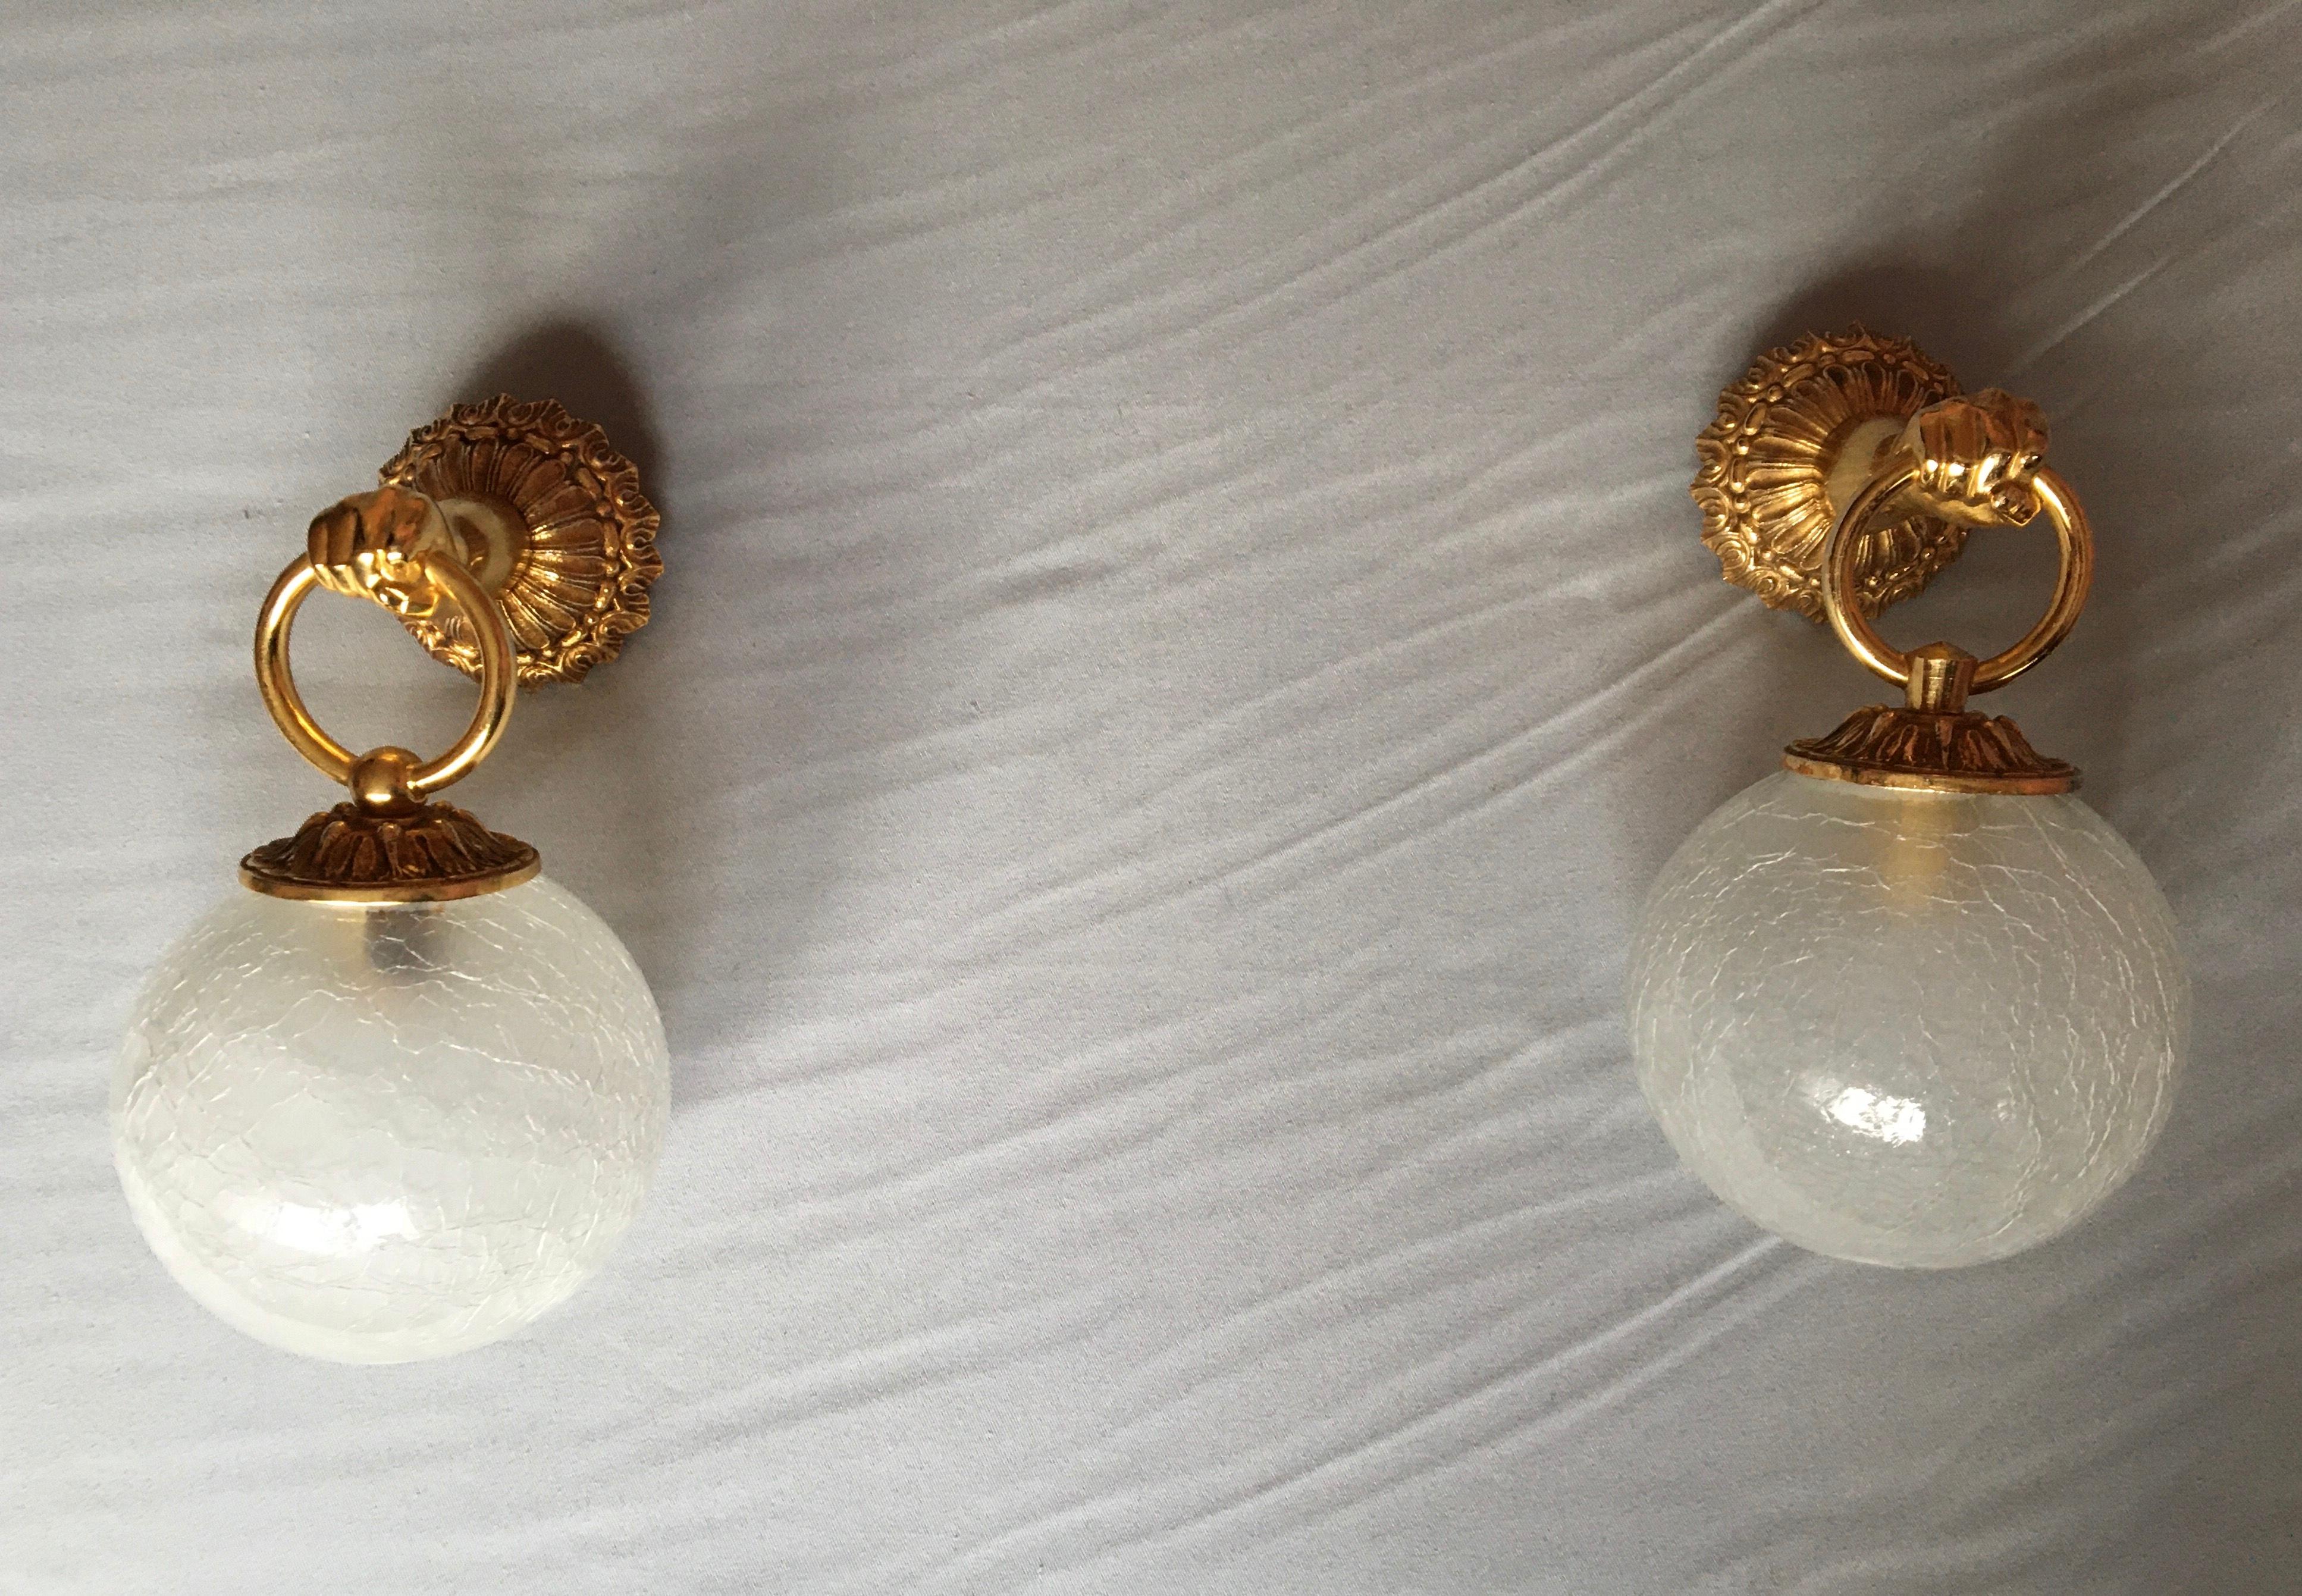 Beautiful pair of French mid 60’s wall sconces in gilted metal with crackled thick glass globe.

The pair is in very good condition and electricity fit the Us Standard (baionnet bulb holder, 60 watts maxi per shade).

The ring attachment part of